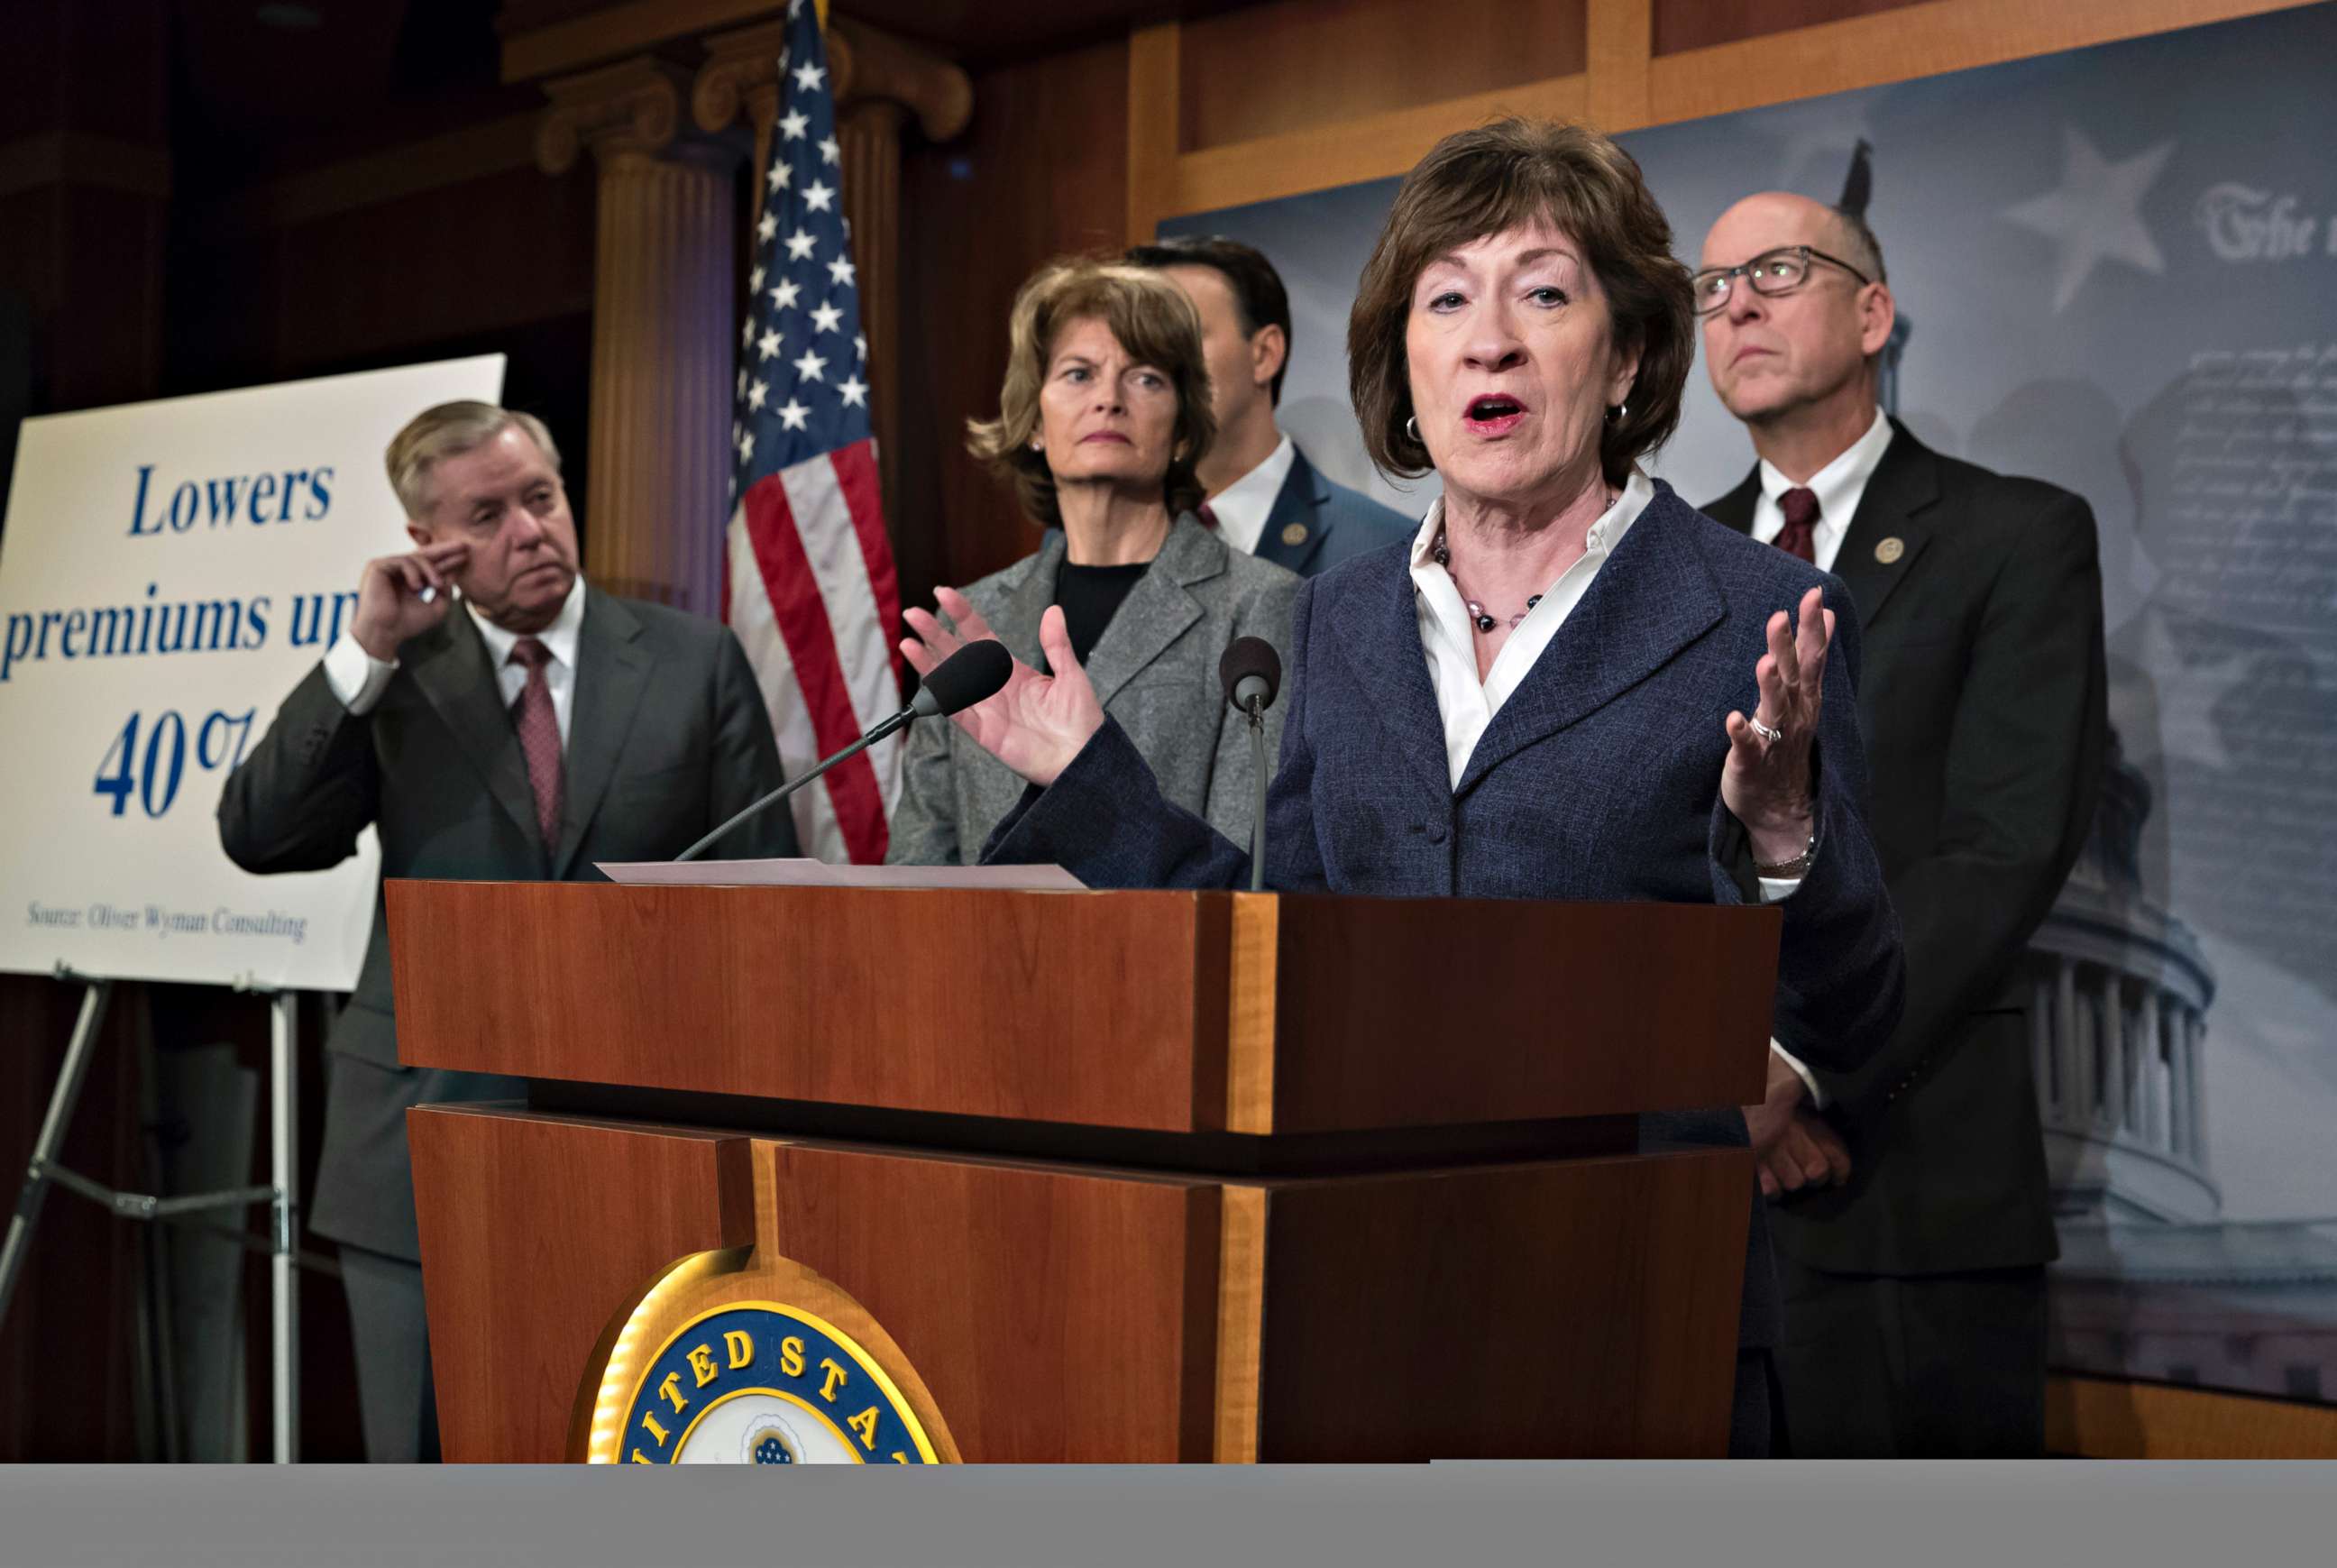 Sen. Susan Collins, joined, from left, by Sen. Lindsey Graham, Lisa Murkowski, and Rep. Greg Walden, pushes for inclusion in the pending government spending bill of provisions to lower health insurance premiums on the Affordable Care Act marketplace.